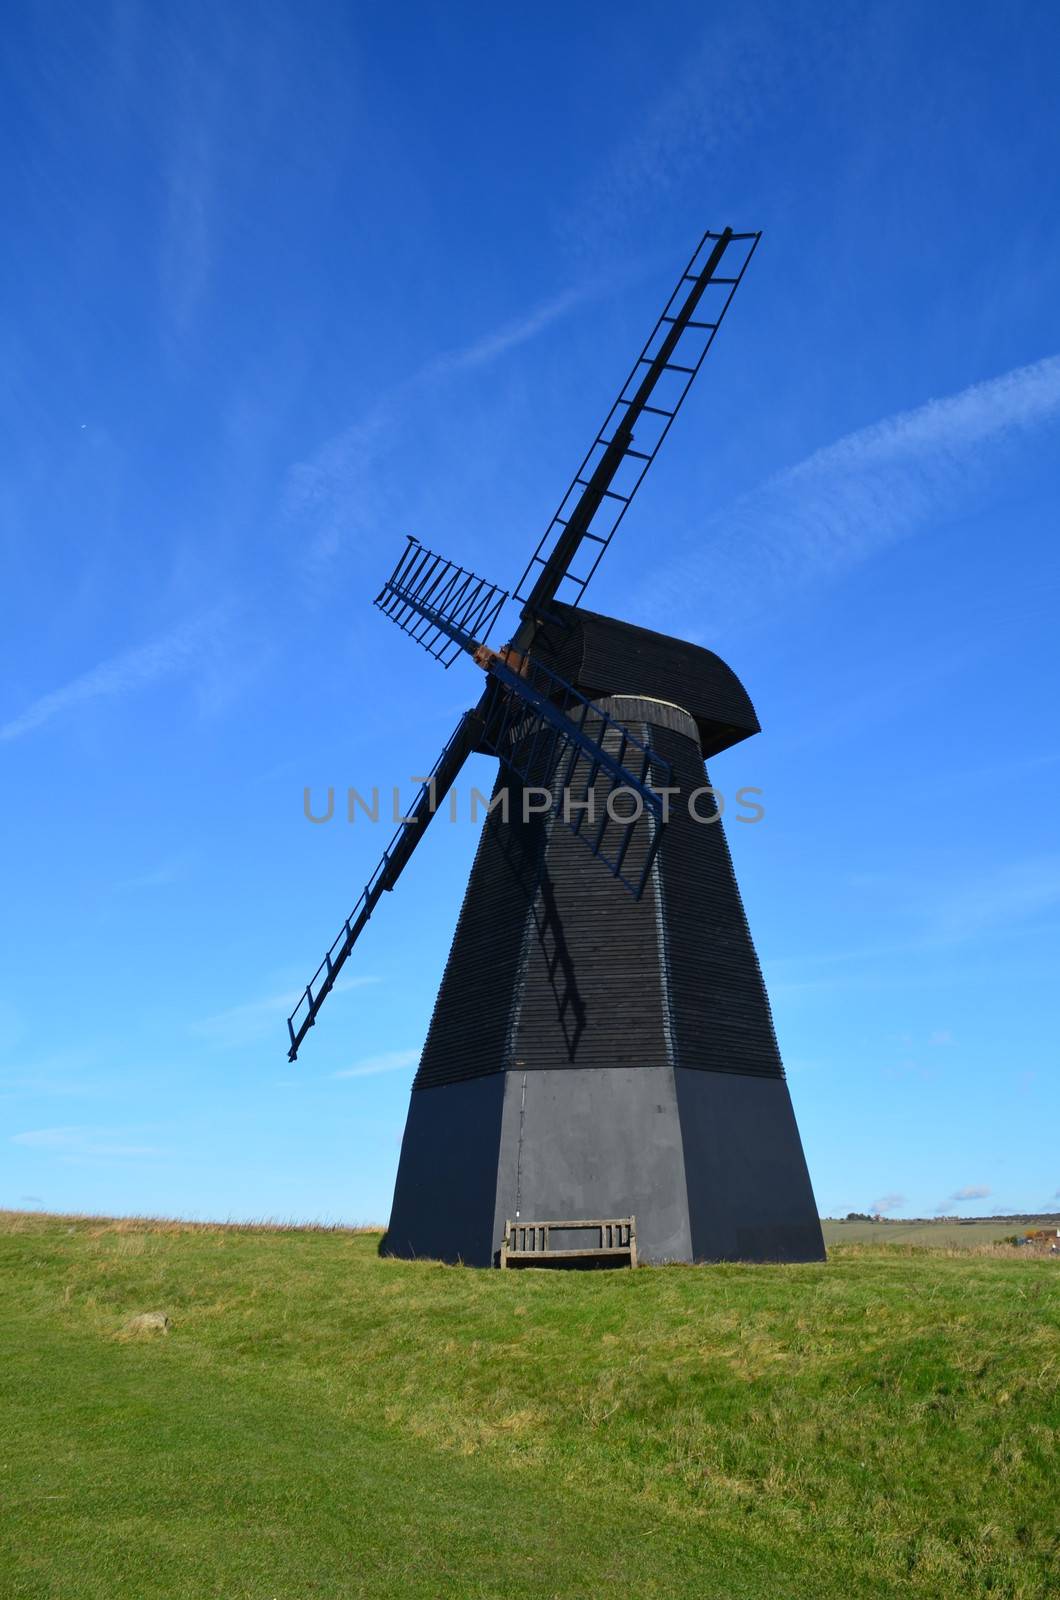 Built in 1802 this traditional smock windmill is one of the oldest in the County of Sussex,England. The mill is at Rottingdean a small village on the out skirts of the City of Brighton.